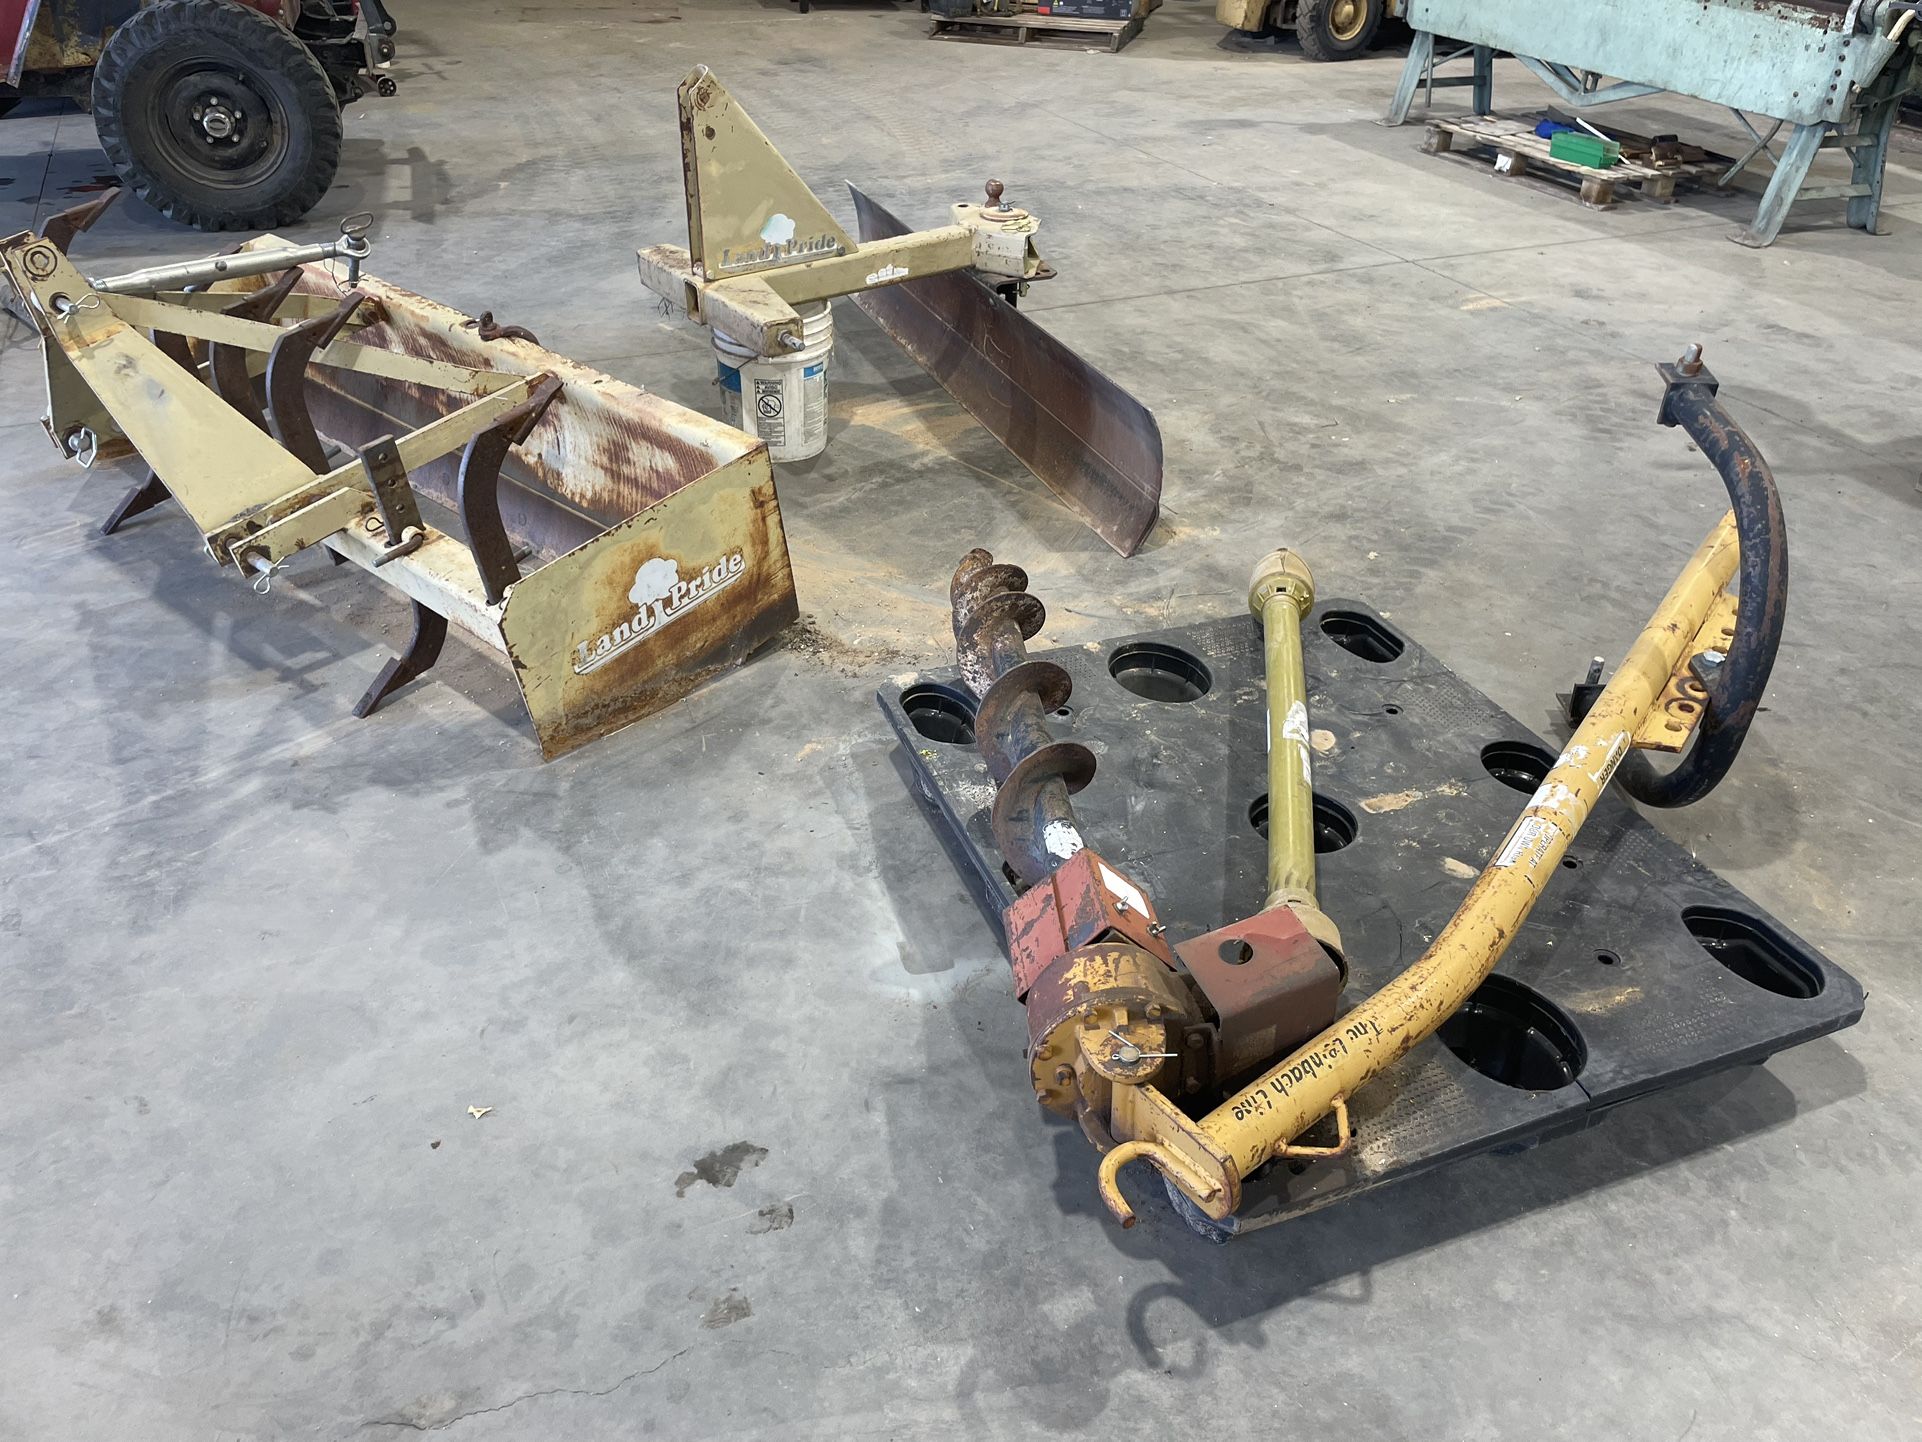 Tractor Implements; Box Blade, Rear Blade and Auger